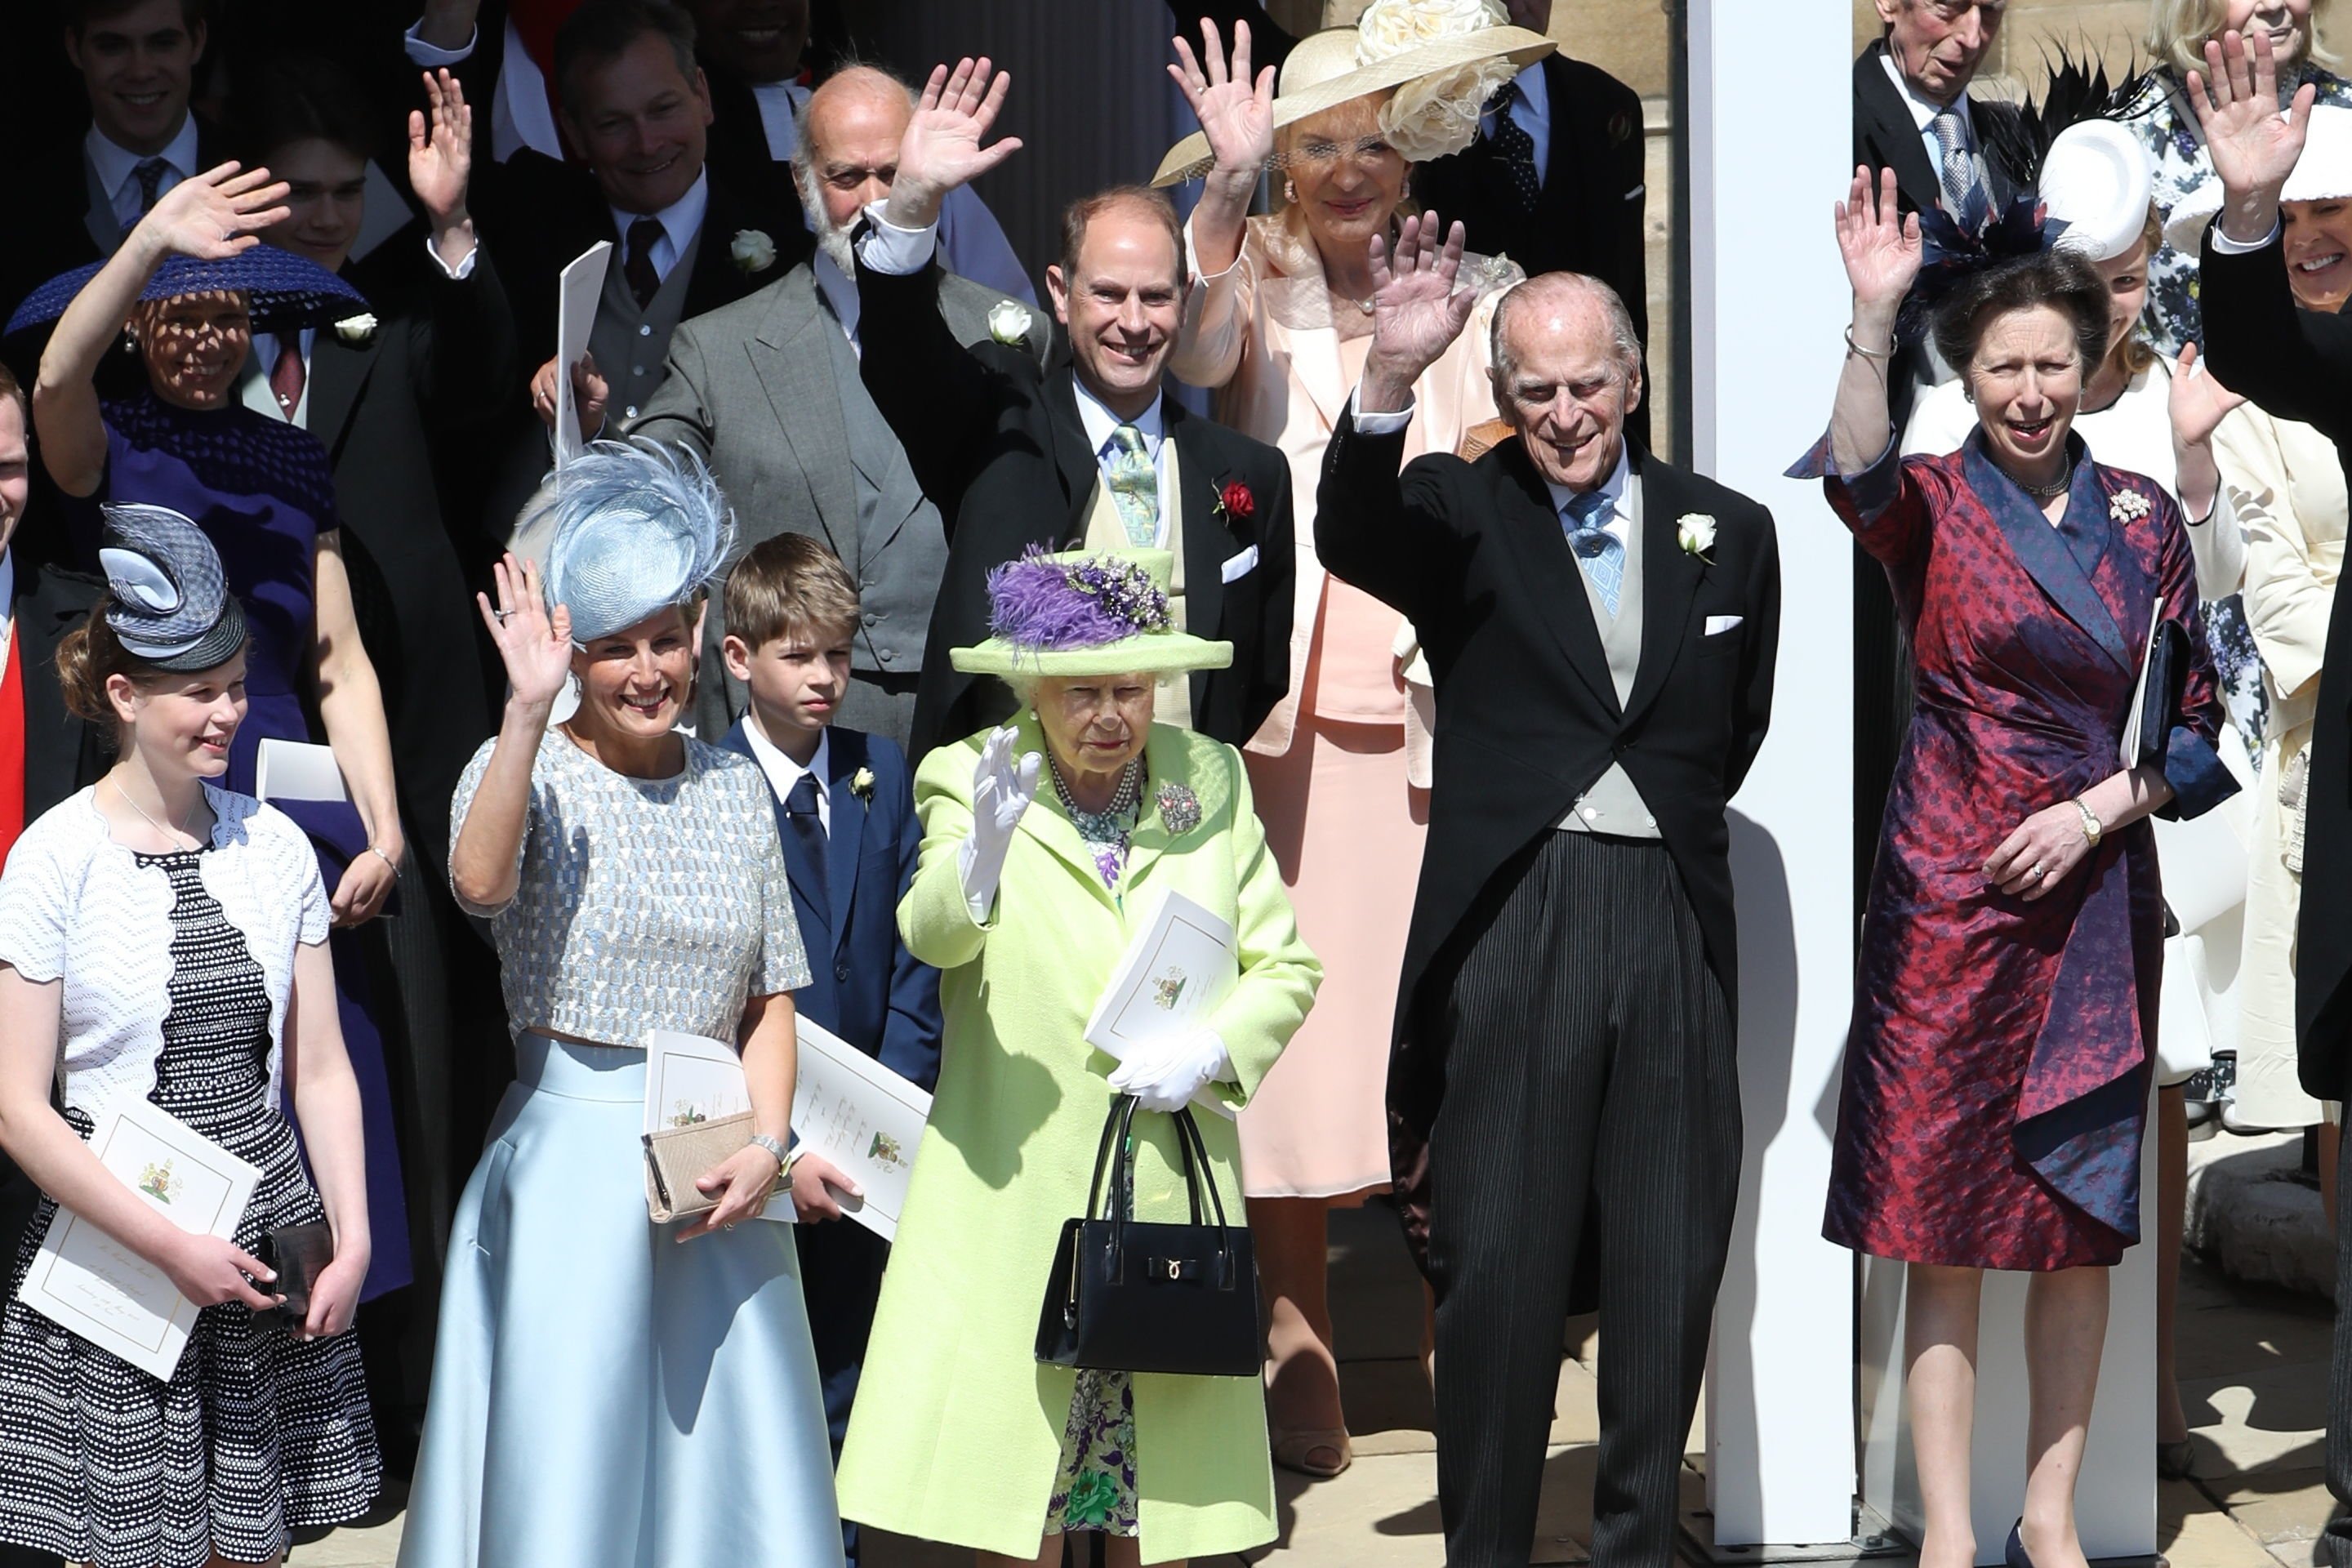 Lady Louise Windsor, Sophie, Countess of Wessex, James, Viscount Severn, Queen Elizabeth II, Prince Michael of Kent, Prince Edward, Prince Philip, Princess Anne, Princess Royal wave after the wedding of Prince Harry and Meghan Markle at St George's Chapel in Windsor Castle on May 19, 2018 in Windsor, England | Source: Getty Images